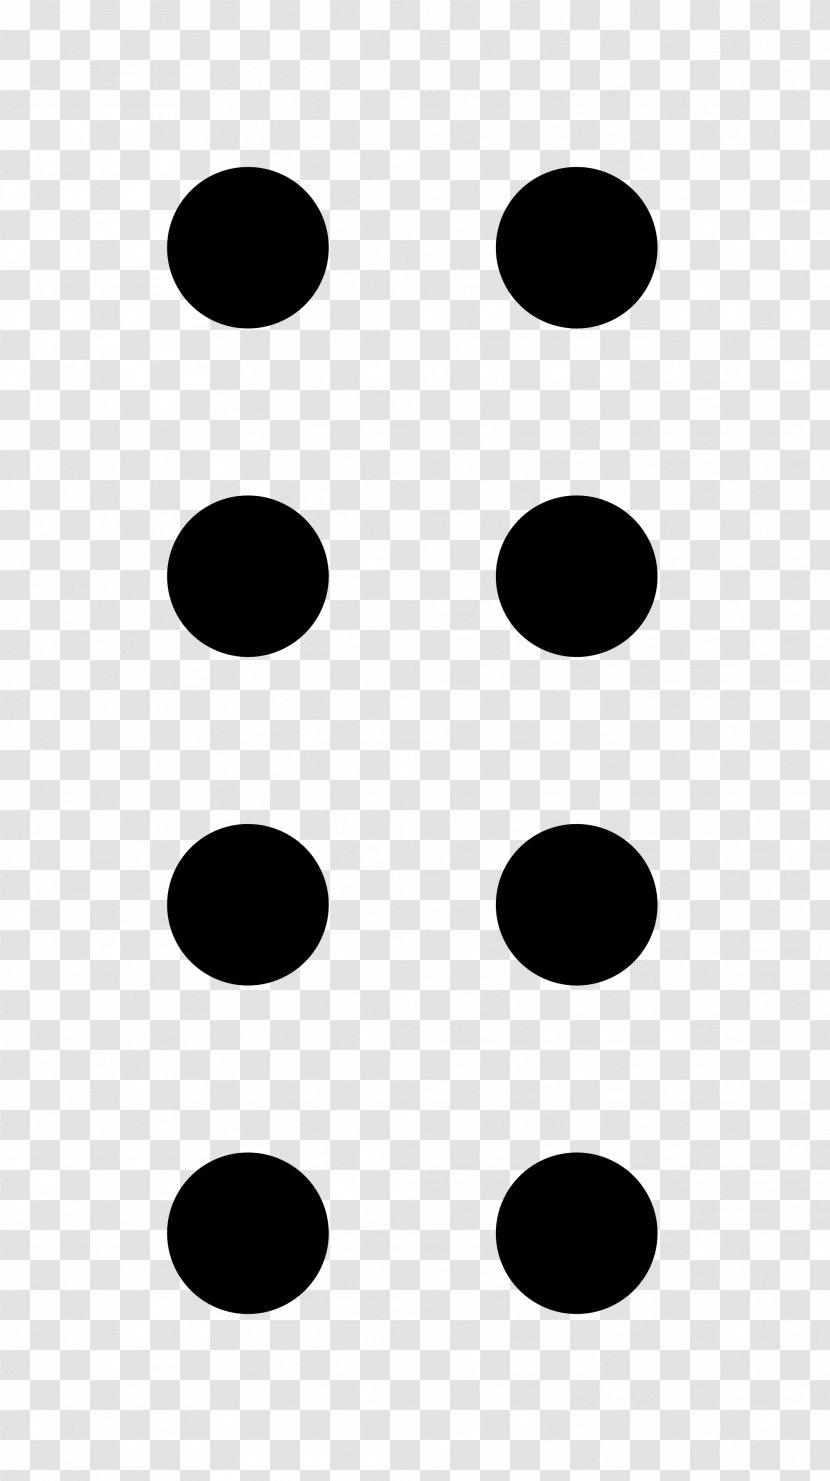 Eight Dots Clip Art - Android - Polka Dot Transparent PNG